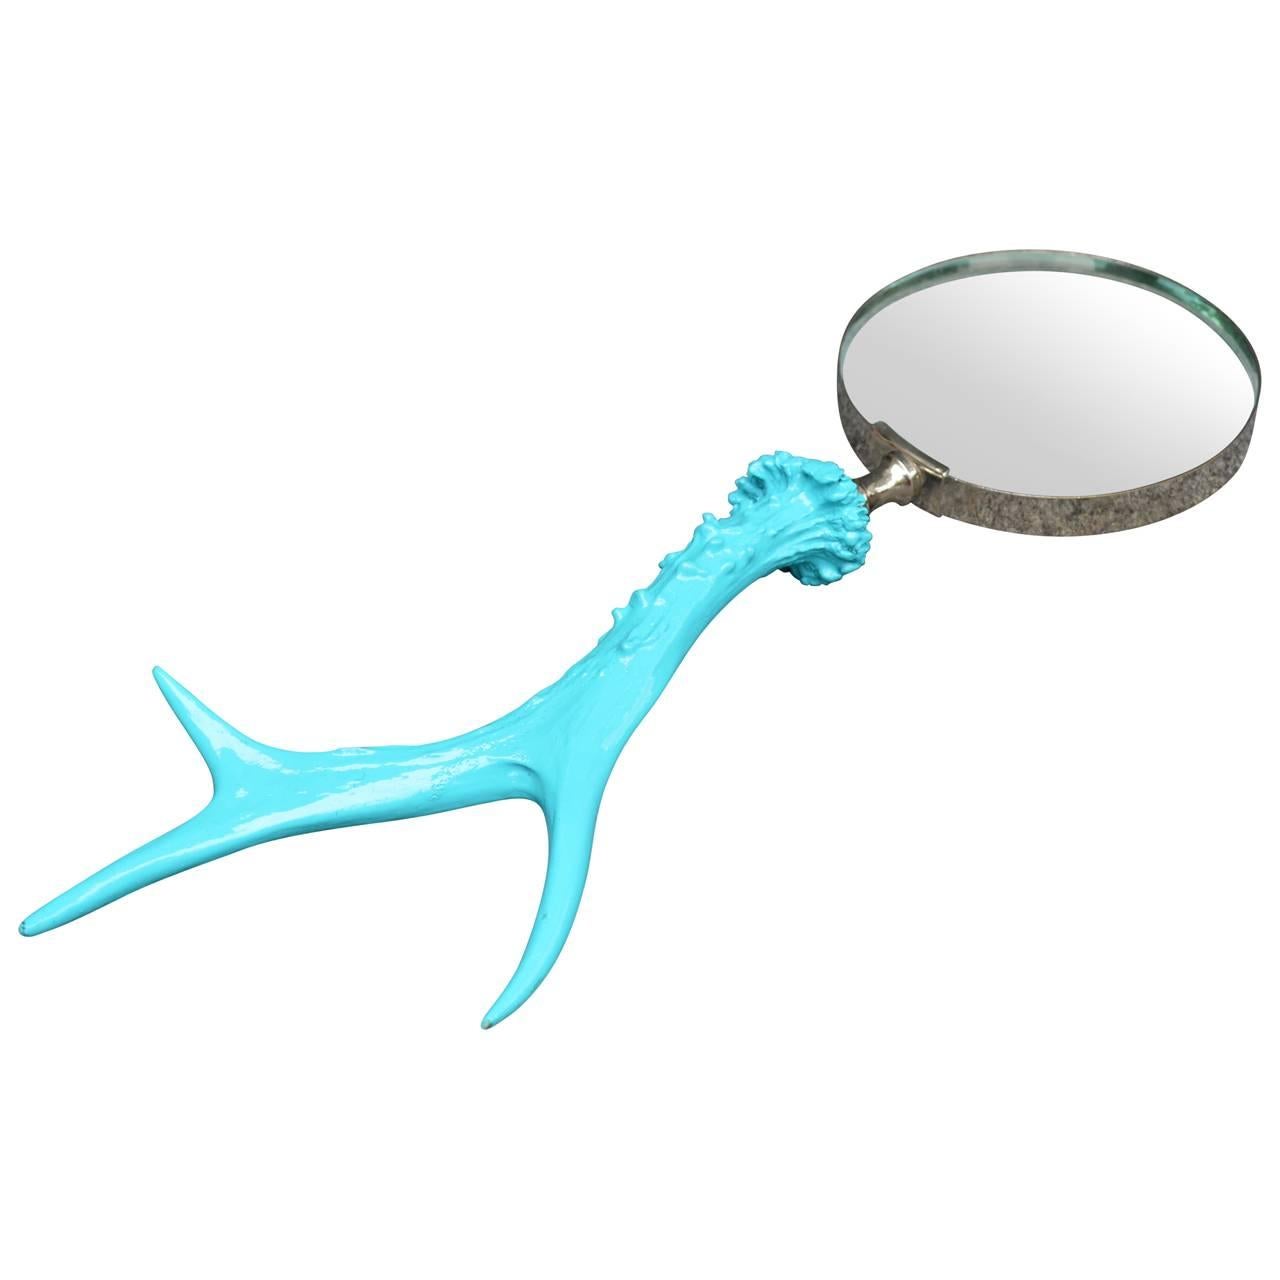 Turquoise antler handle magnifying glass. This vintage magnifying glass has been updated with bright and bold turquoise handle. A fun desk accessory or just a neat addition to an eclectic collection in your home.
 